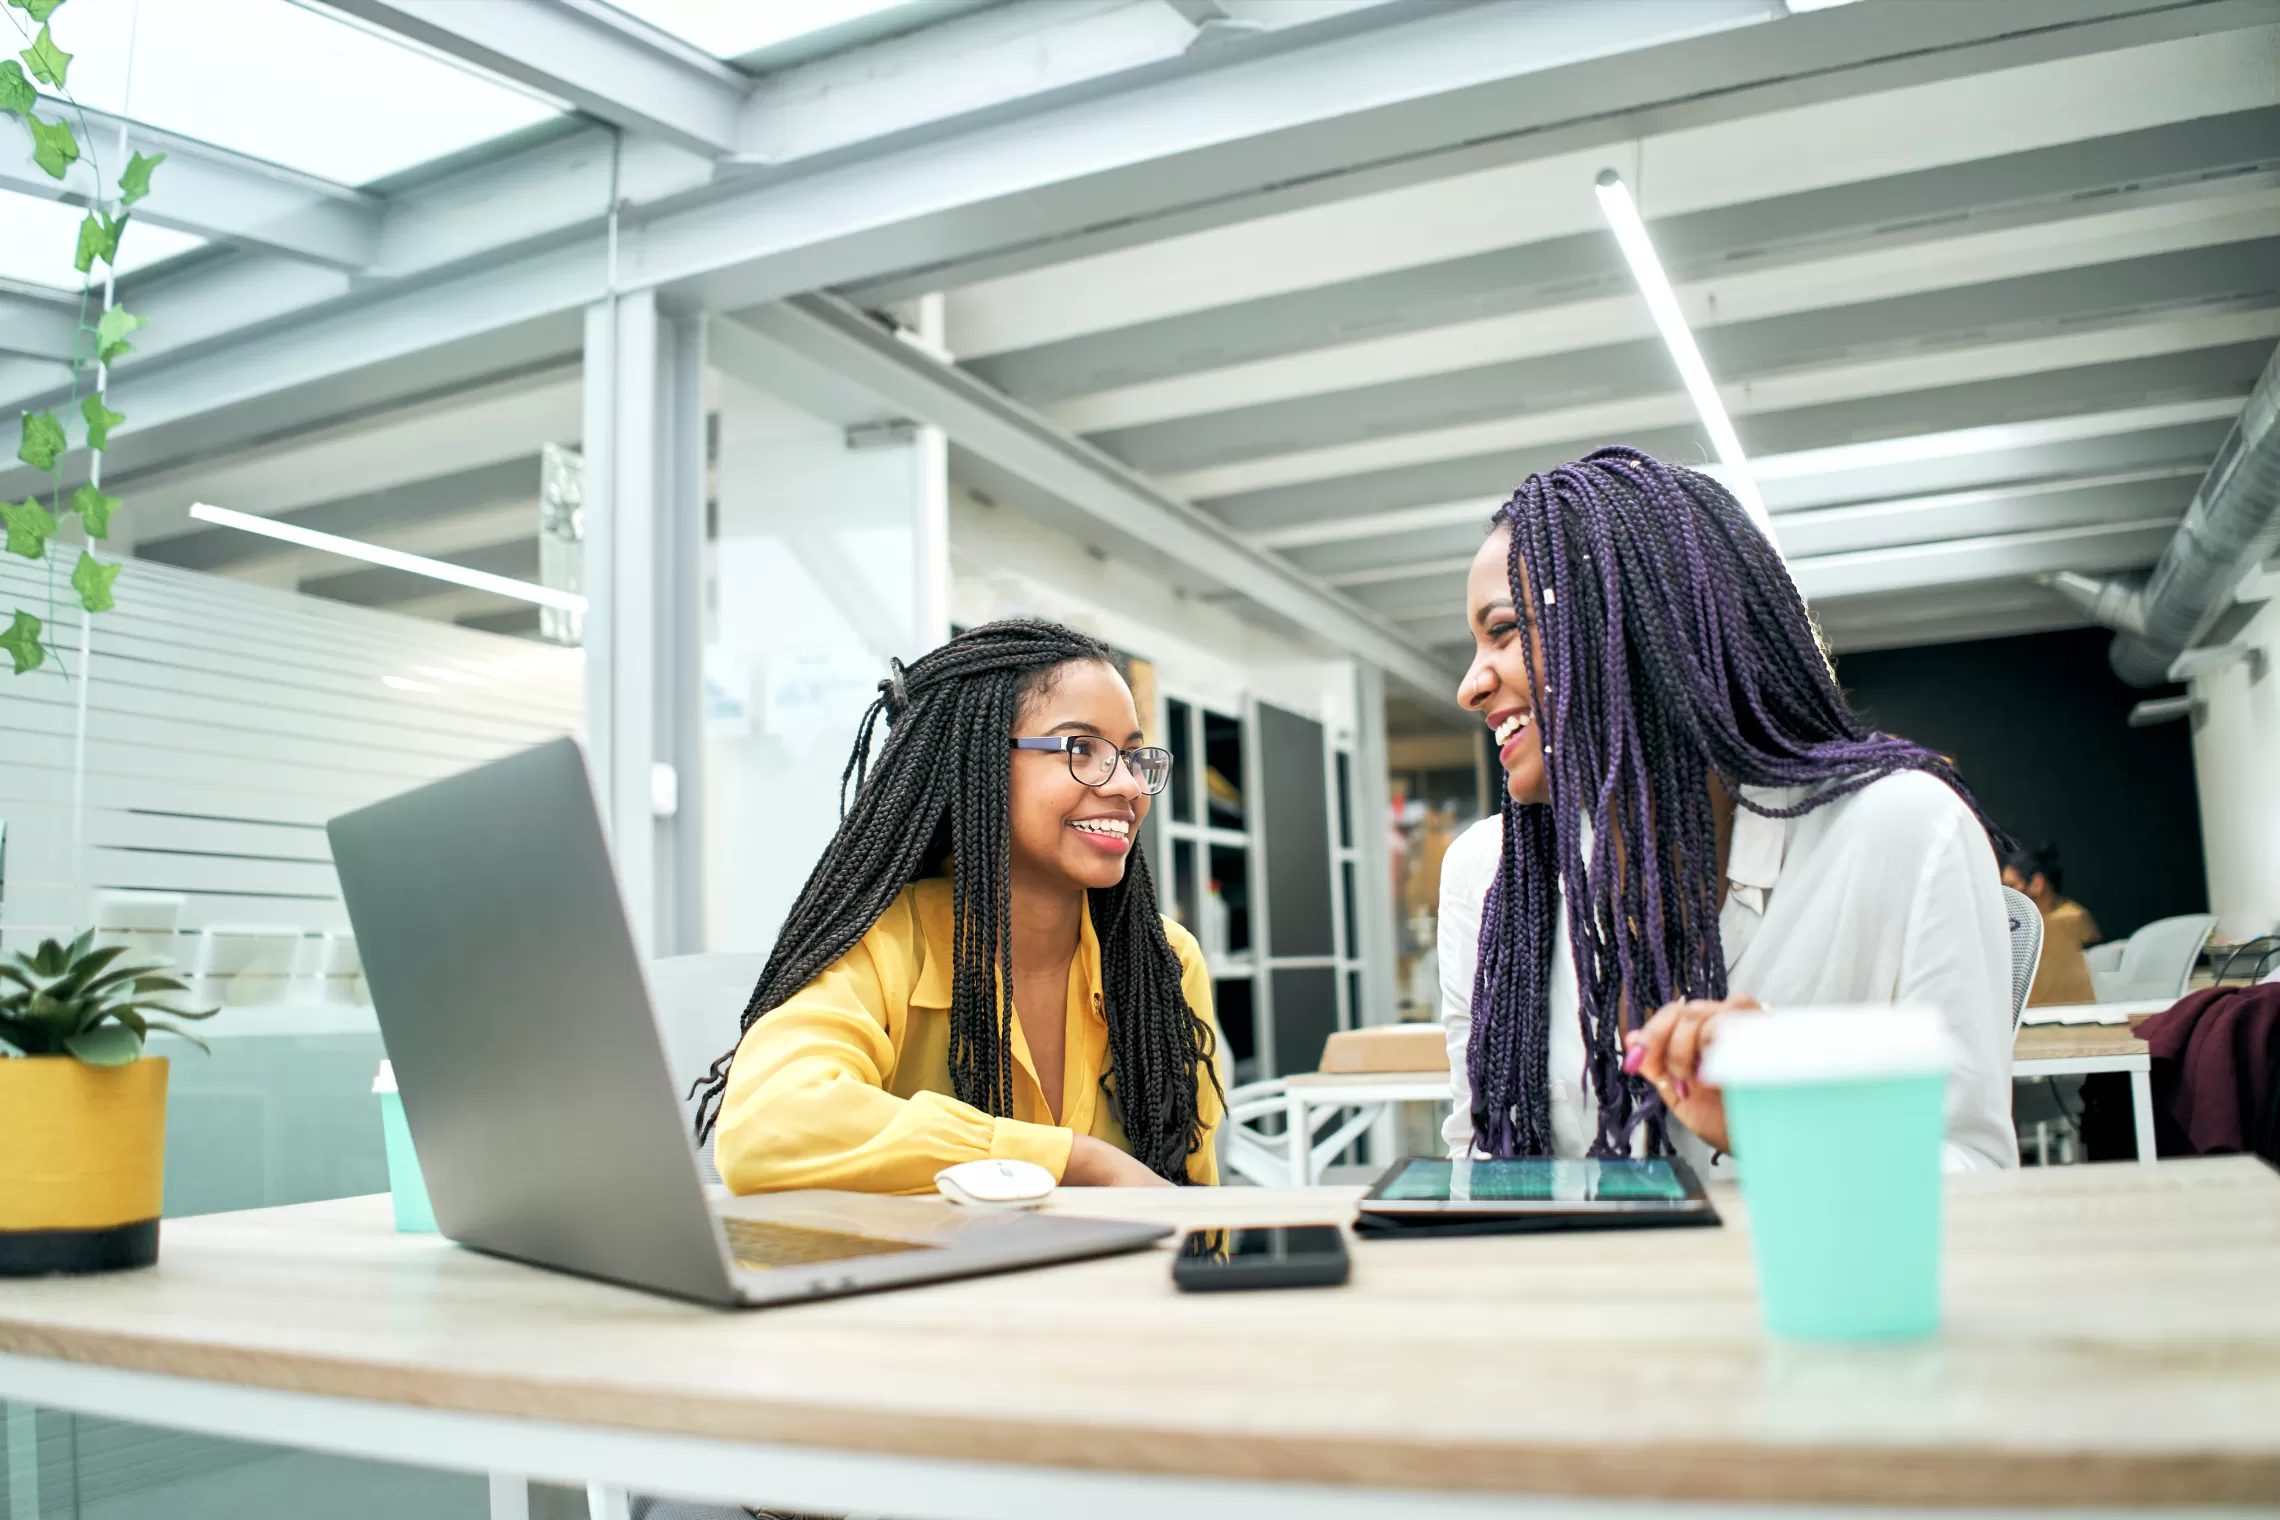 Two women are smiling talking in front of laptop. Both have braids, one is younger than the other. There is a coffee cup on the table.